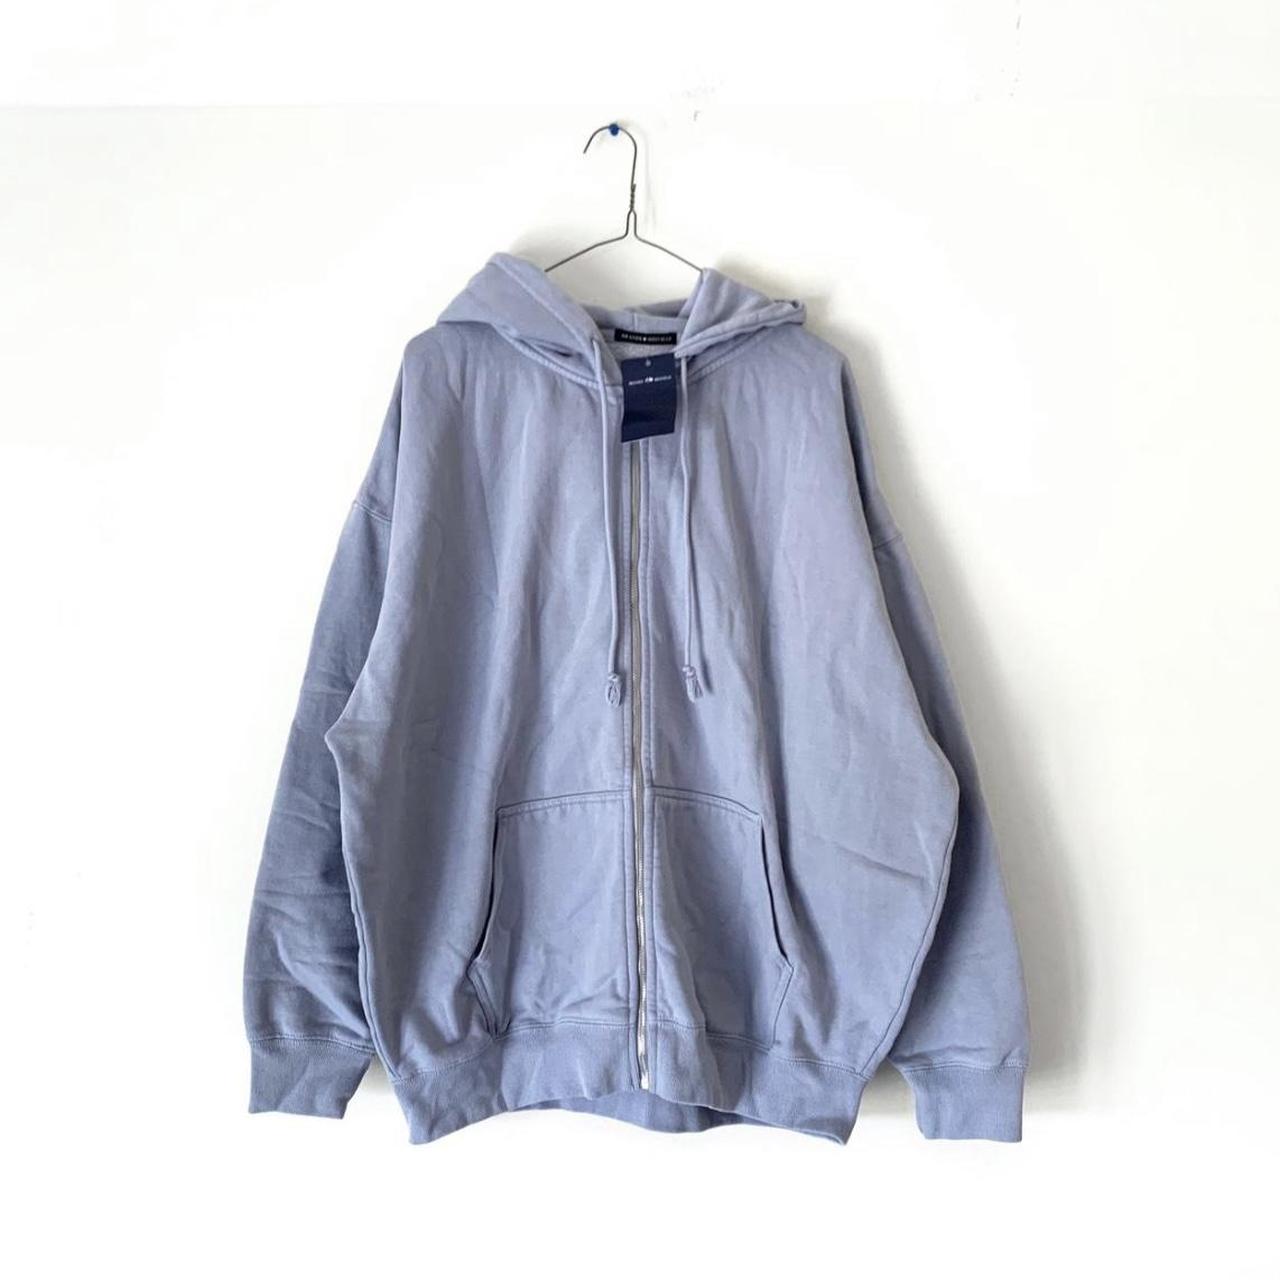 Brandy Melville Zip Up Hoodie in Periwinkle, Women's Fashion, Coats,  Jackets and Outerwear on Carousell